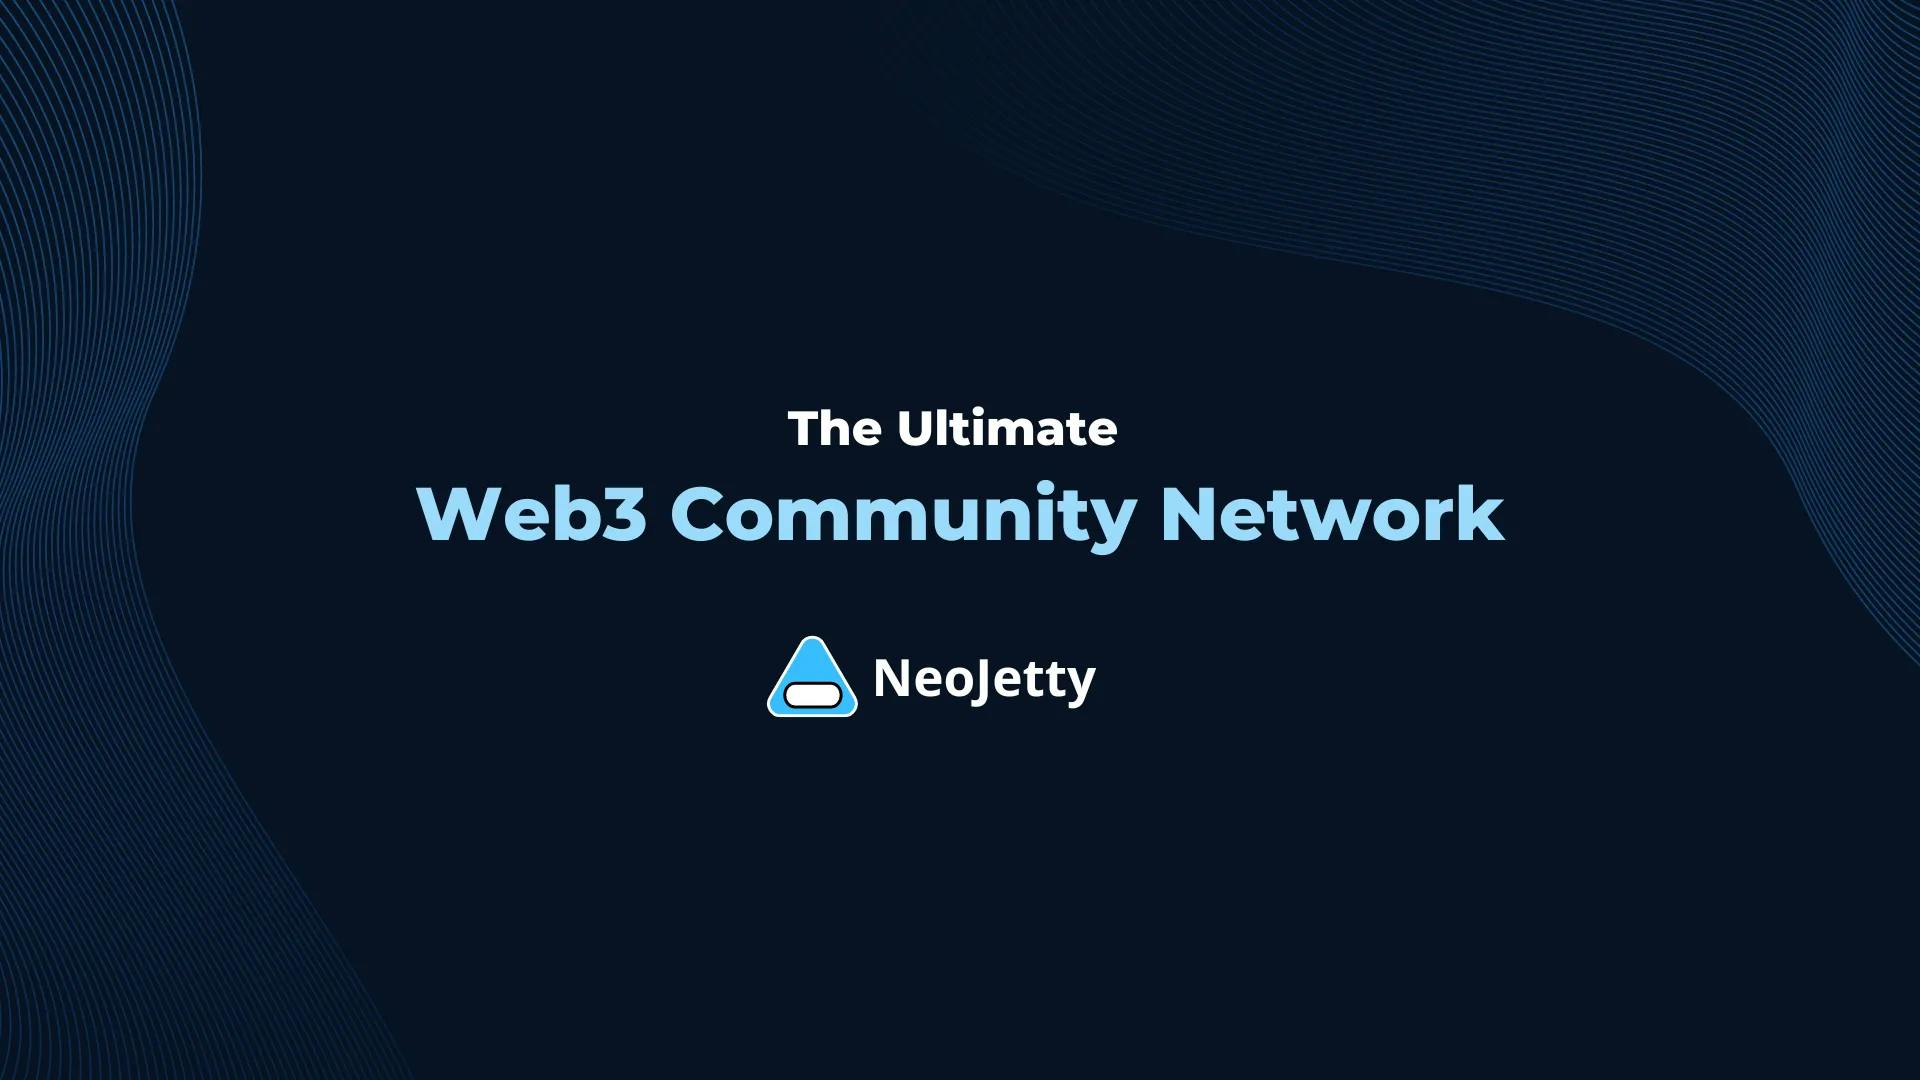 NeoJetty - The ultimate web3 community network